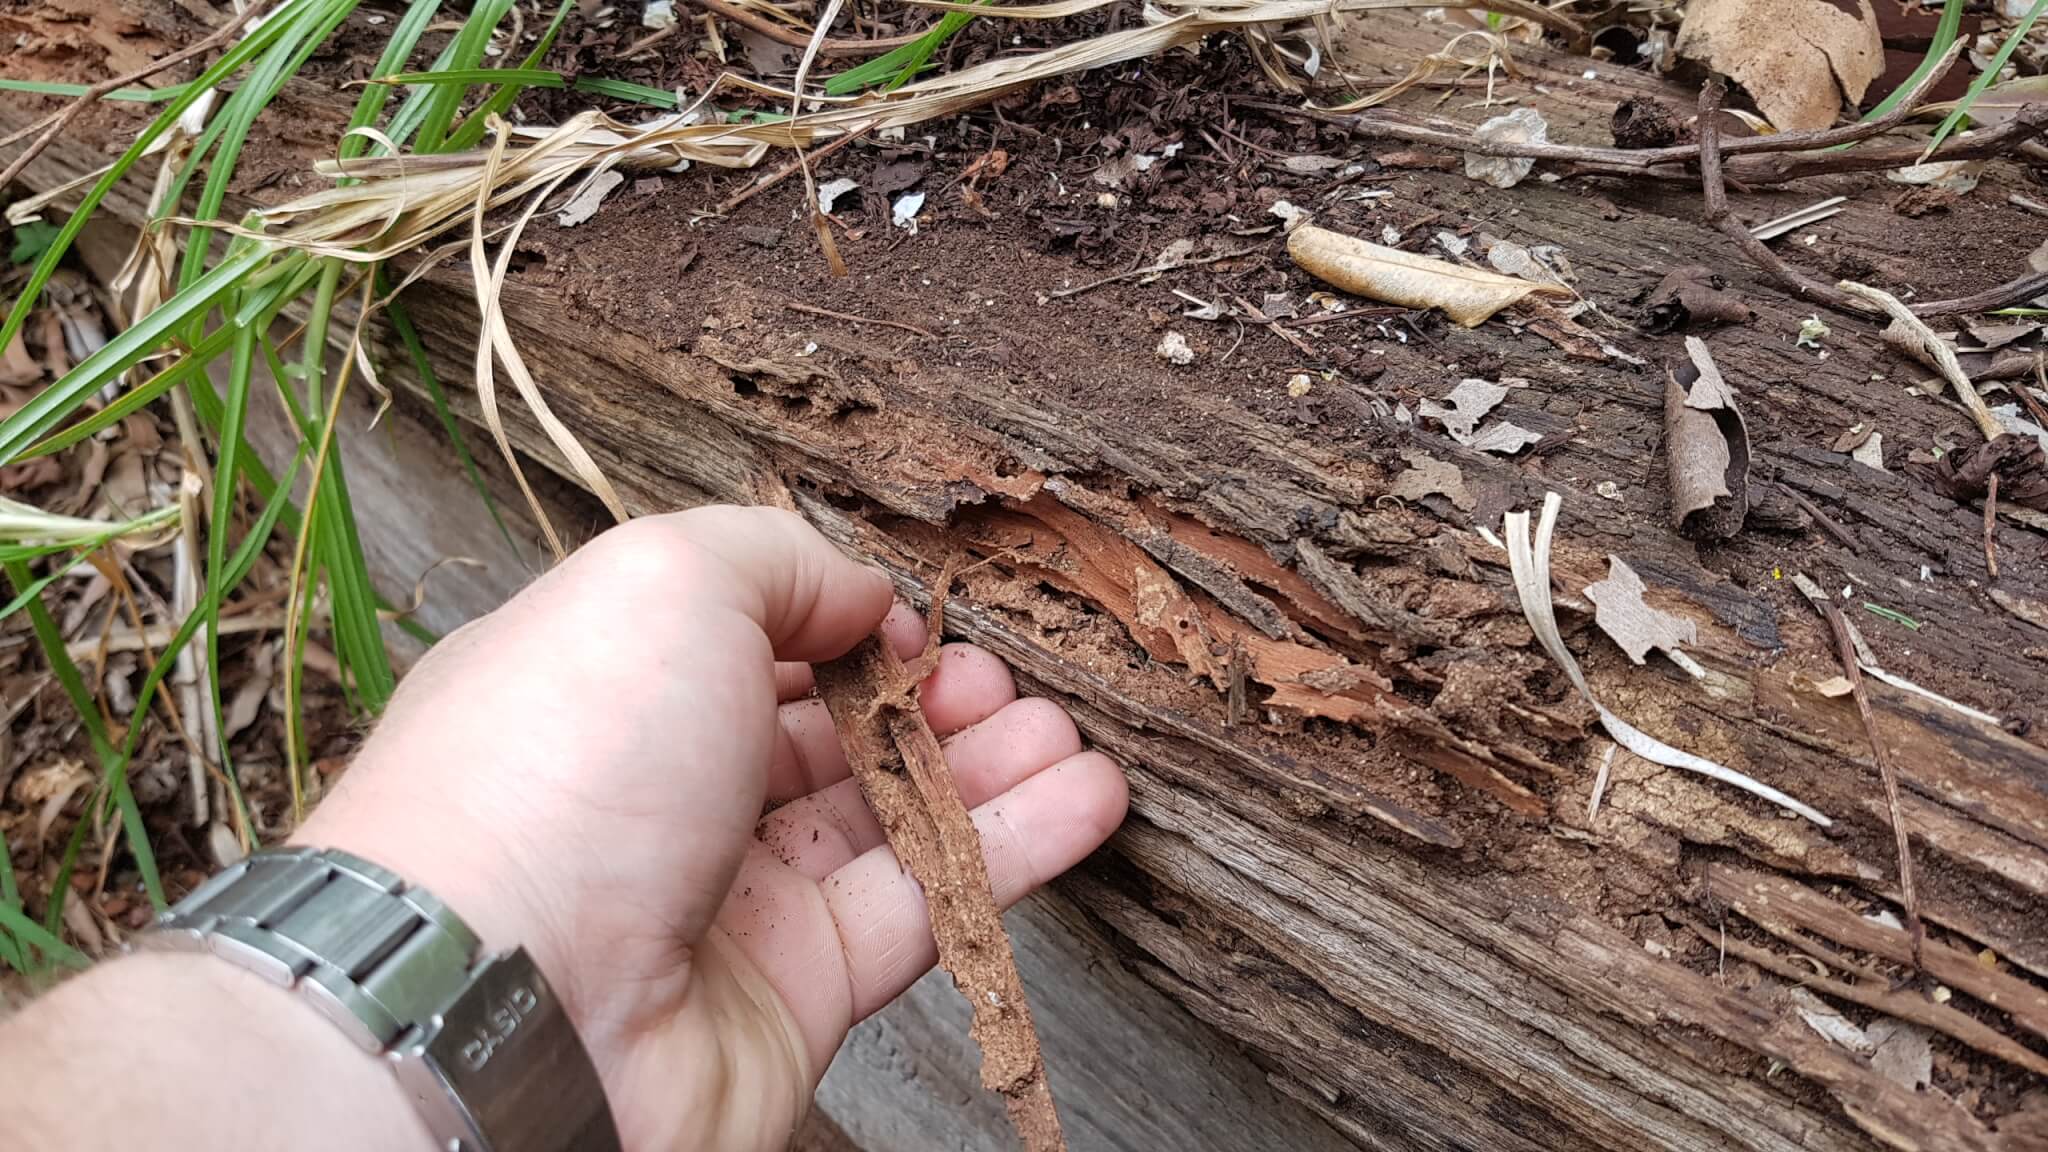 Termite damage found on inspection